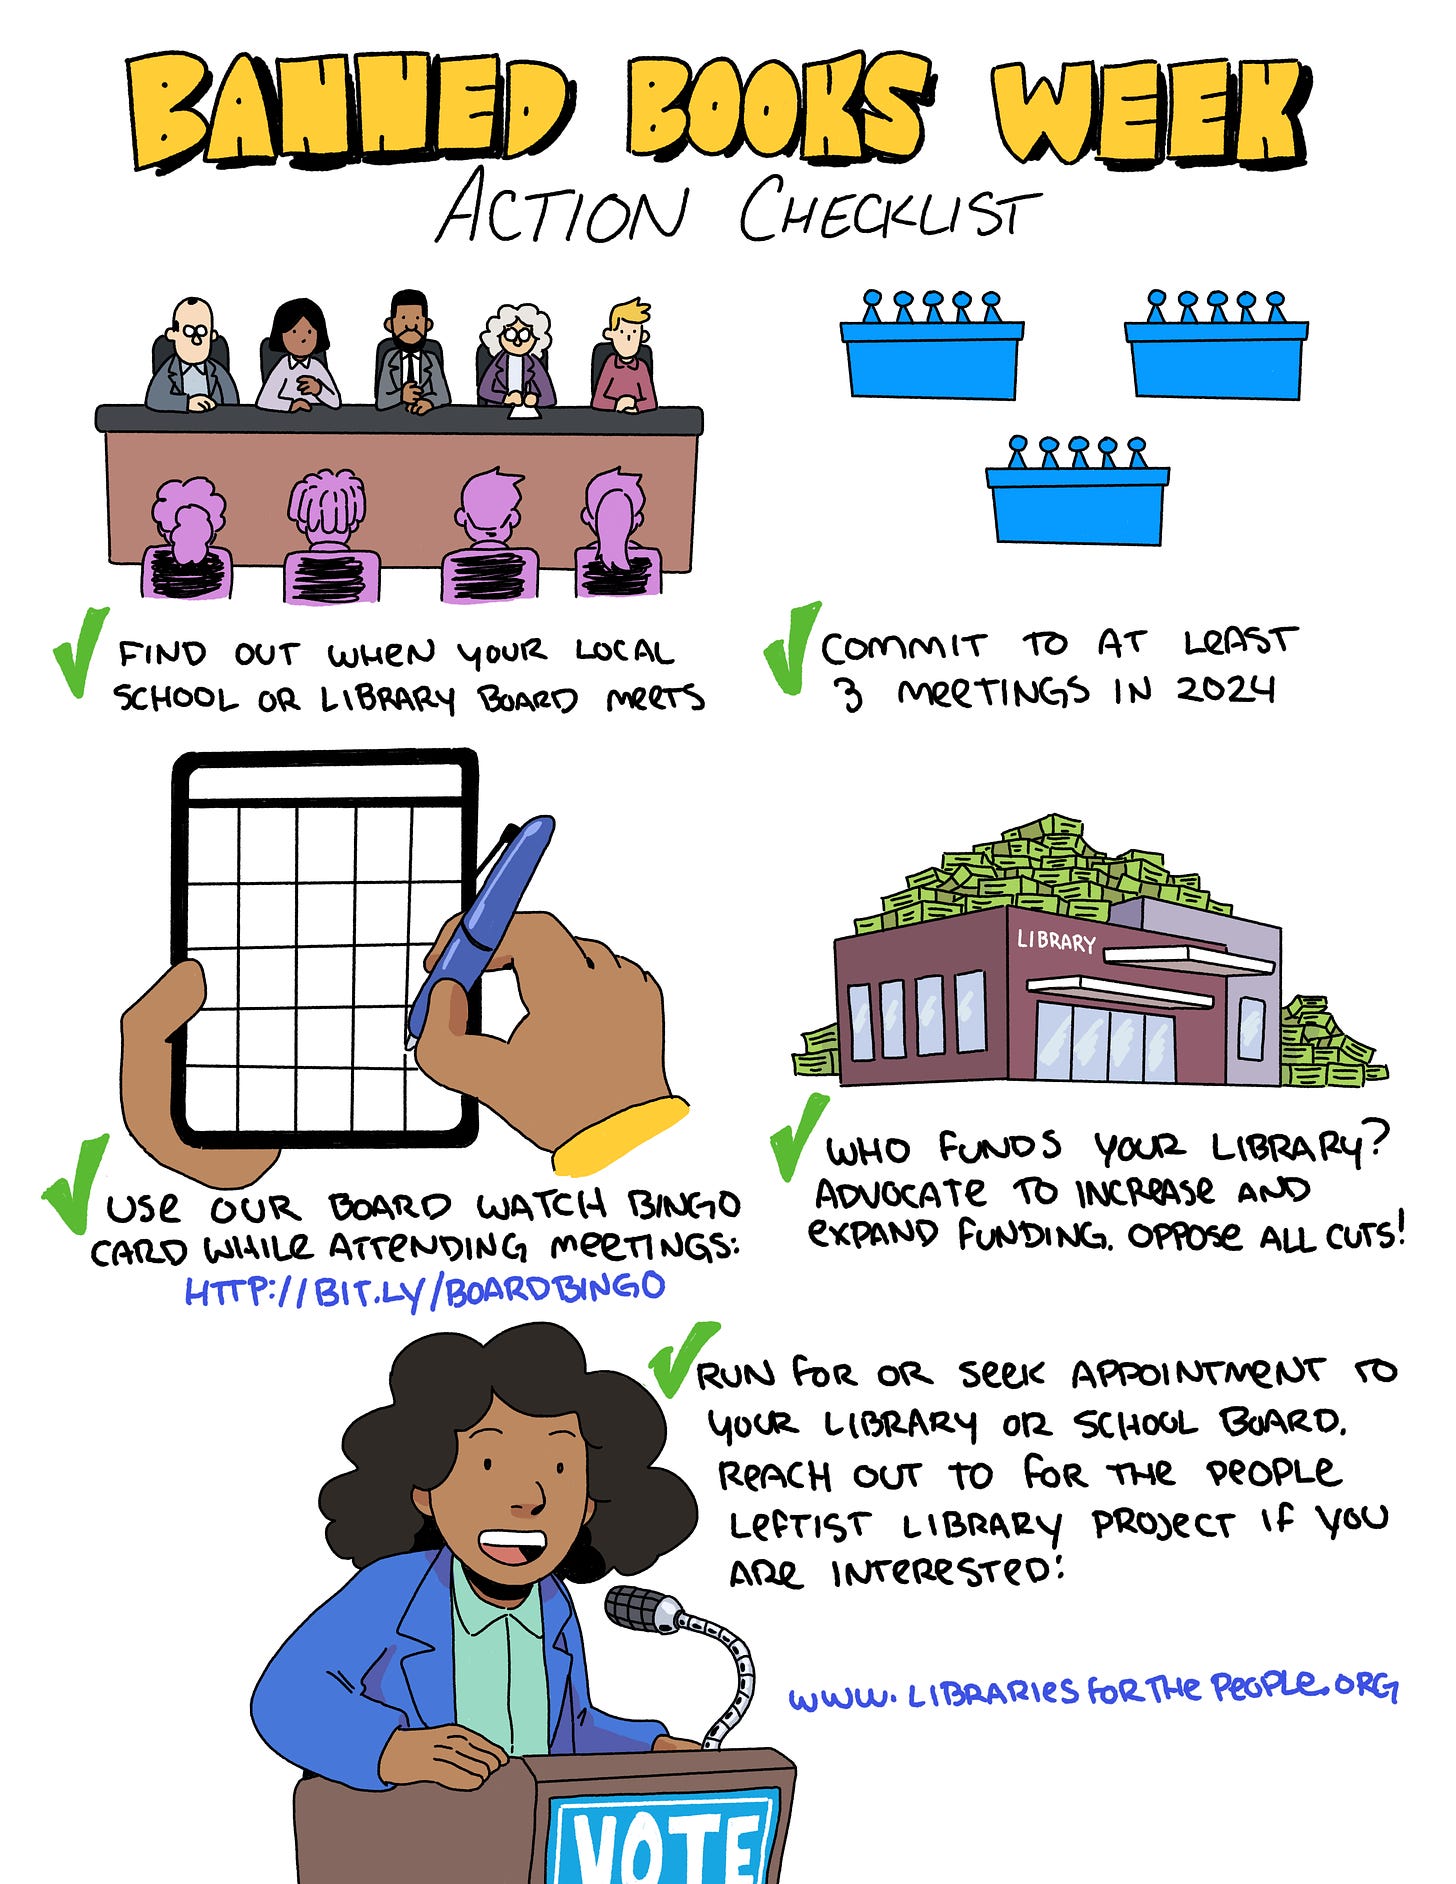 A comic style graphic with the title: Banned Books Week Action Checklist  Square 1 is an illustration of a 5-person board of trustees foreshadowed by meeting attendees with the caption "✔ Find out when your local school or library board meets".  Square 2 is an illustration of 3 (smaller, more simplified) boards of trustees with the caption "✔ Commit to at least 3 meetings in 2024".  Square 3 is an illustration of a hand holding a pen to a bingo card with the caption "✔ Use our board-watcher bingo card while attending meetings http://bit.ly/boardbingo".  Square 4 is an illustration of a library building surrounded by green stacks of money. with the caption "✔ Who funds your library? Advocate to increaes and expand funding. Oppose all cuts!".  Square 5 is an illustration of library defender speaking into a microphone at a podium with the word "vote" on it with the caption "✔ Run for or seek appointment to your library or school board. Reach out to For the People Leftists Library Project if you are interested!".  There's also a url included near the bottom right hand corner of the comic: www.librariesforthepeople.org